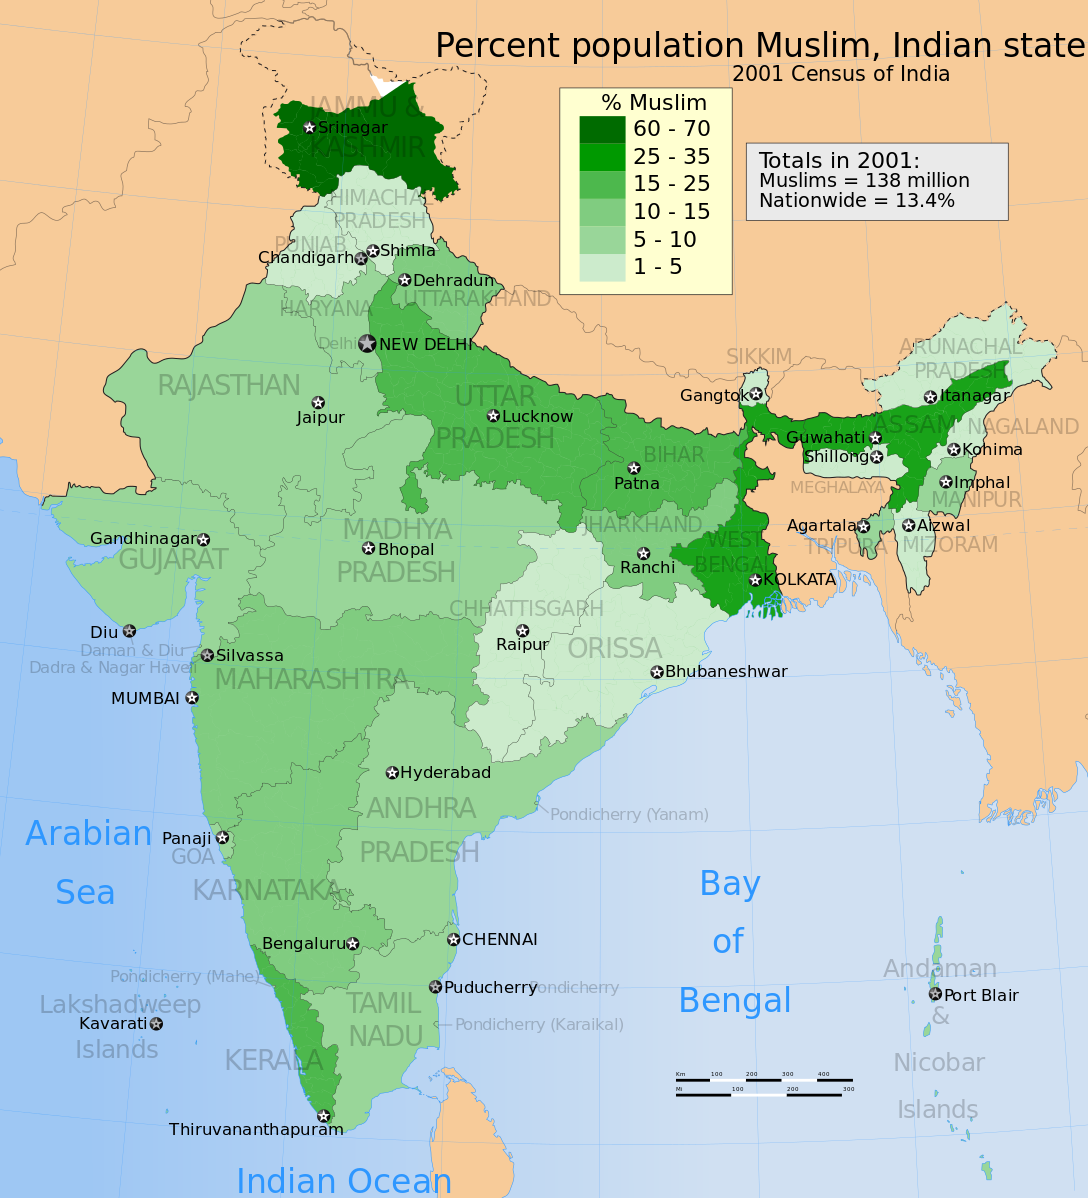 2001 census data on religion, illustrating the percentage of Muslims in India.